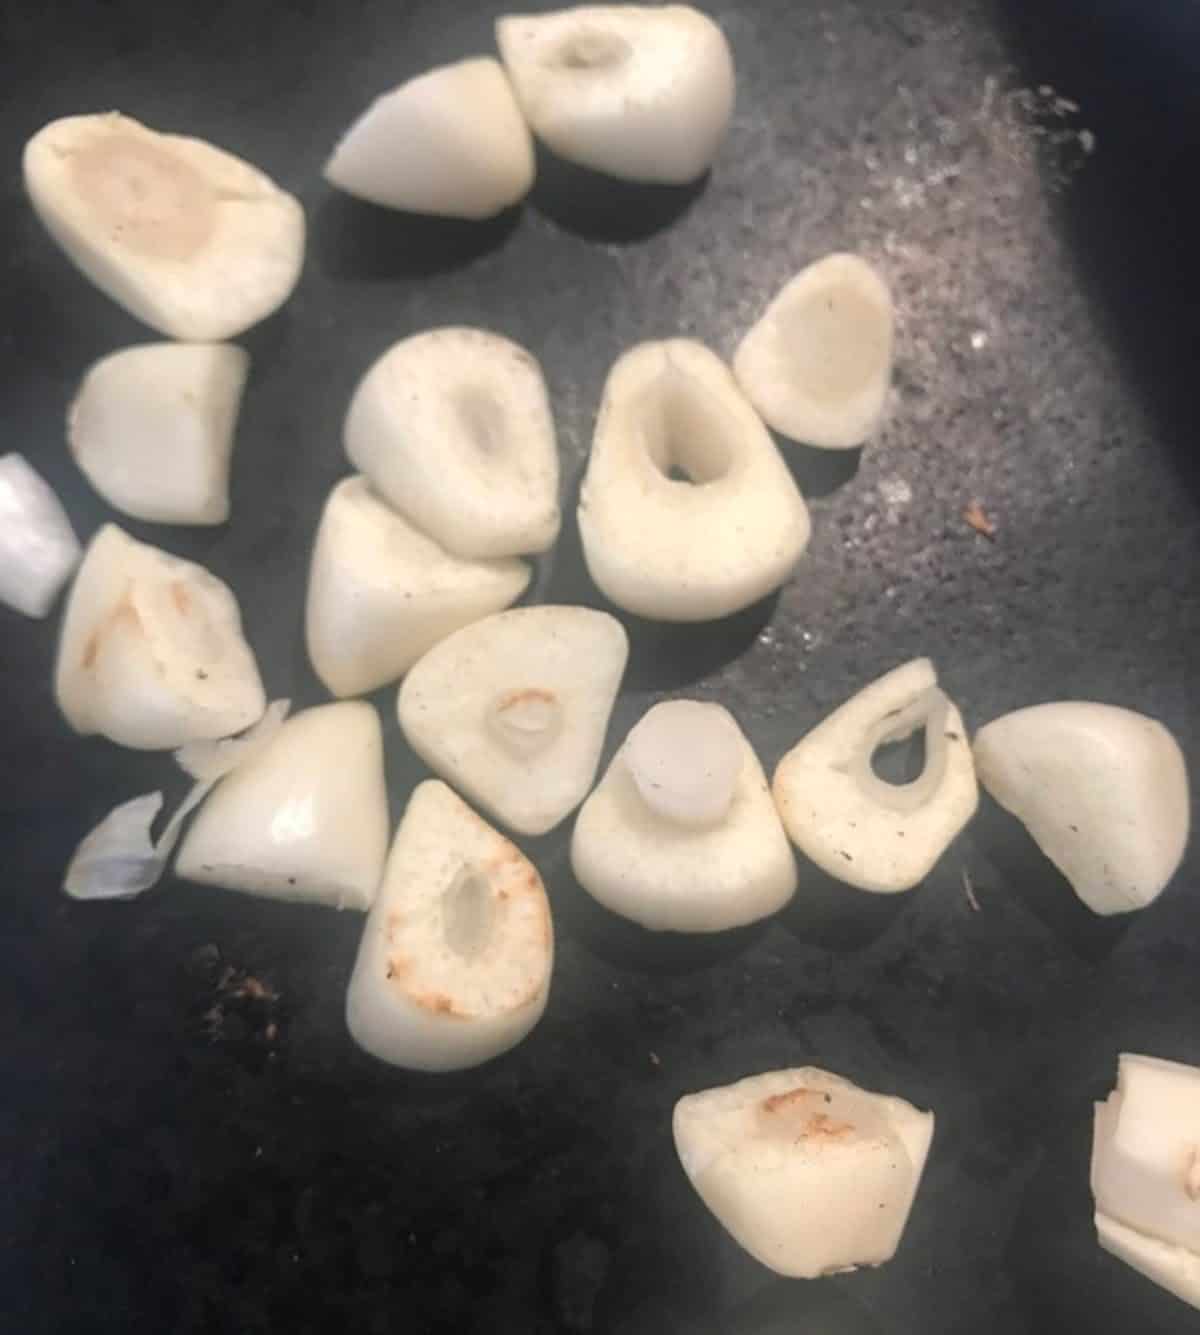 Garlic slices roasted in a cast iron pan.